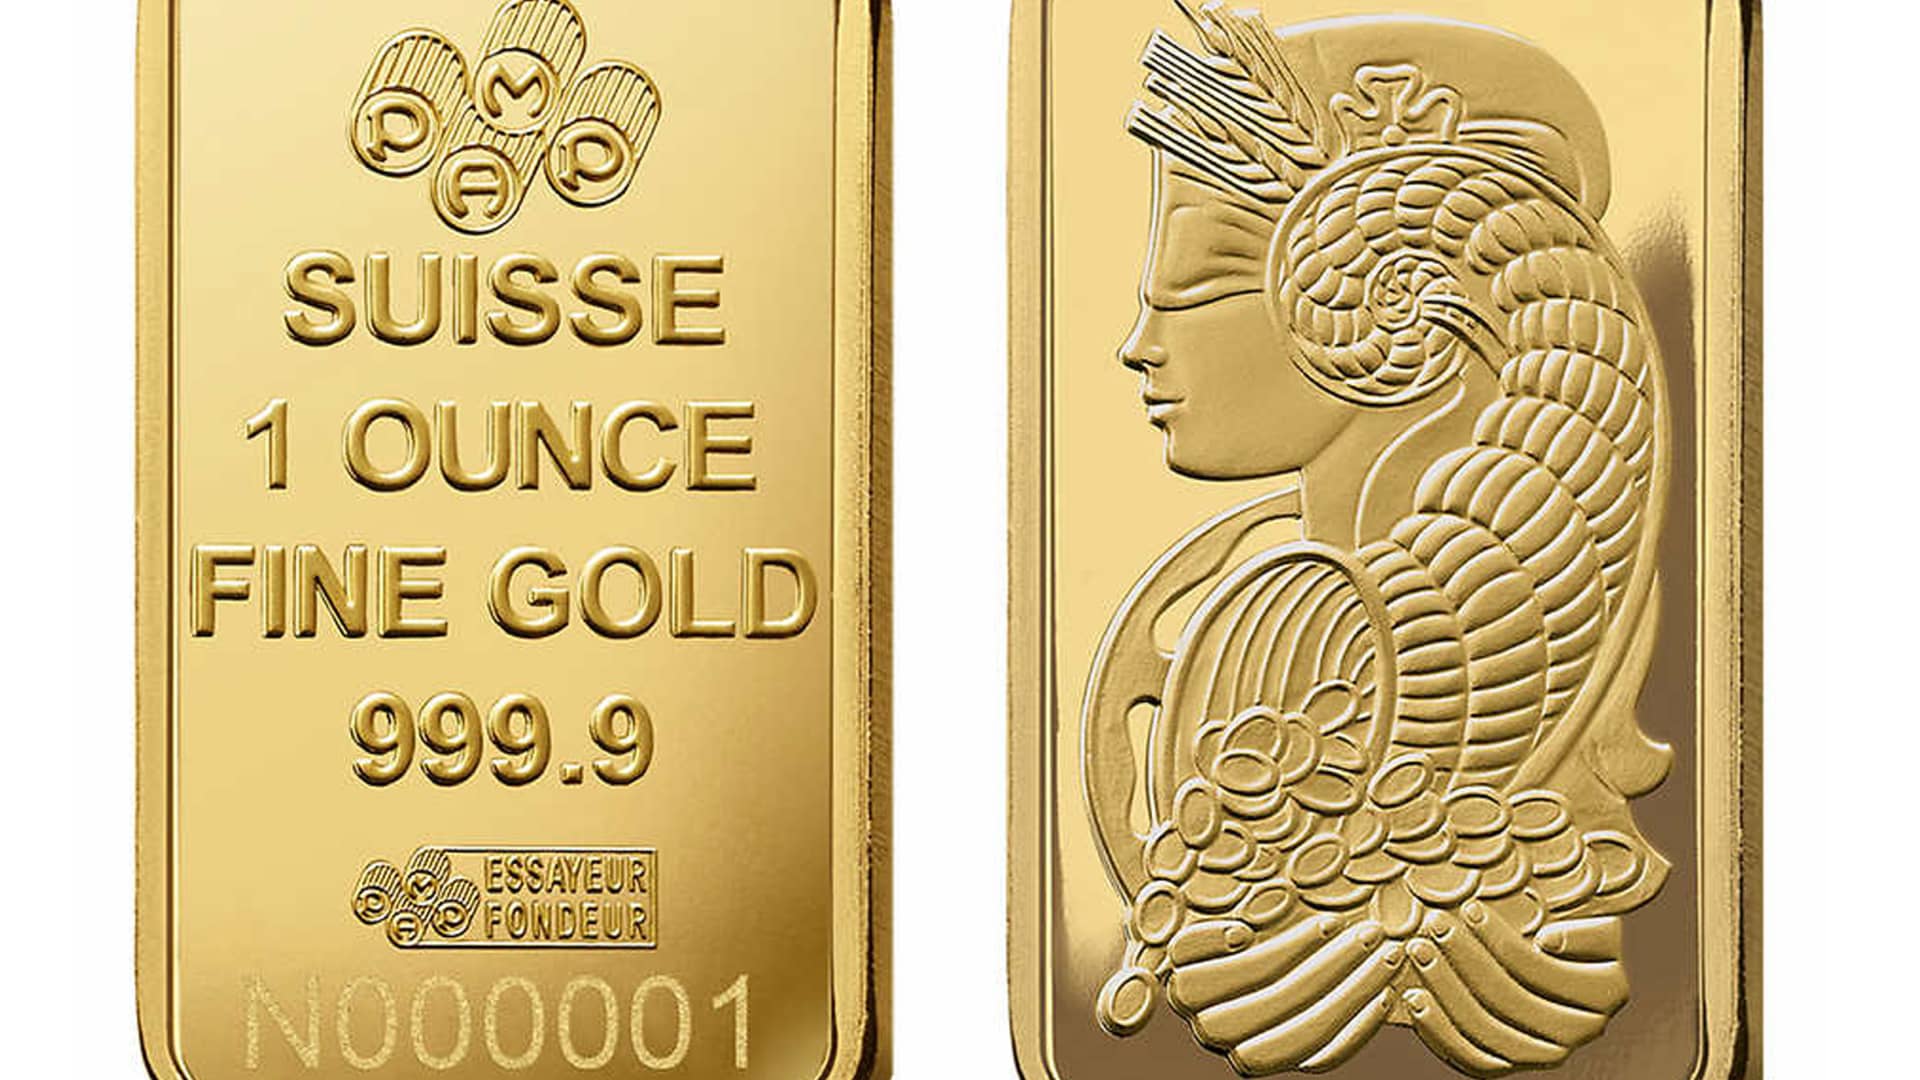 Costco is selling gold bars and they are selling out within a few hours